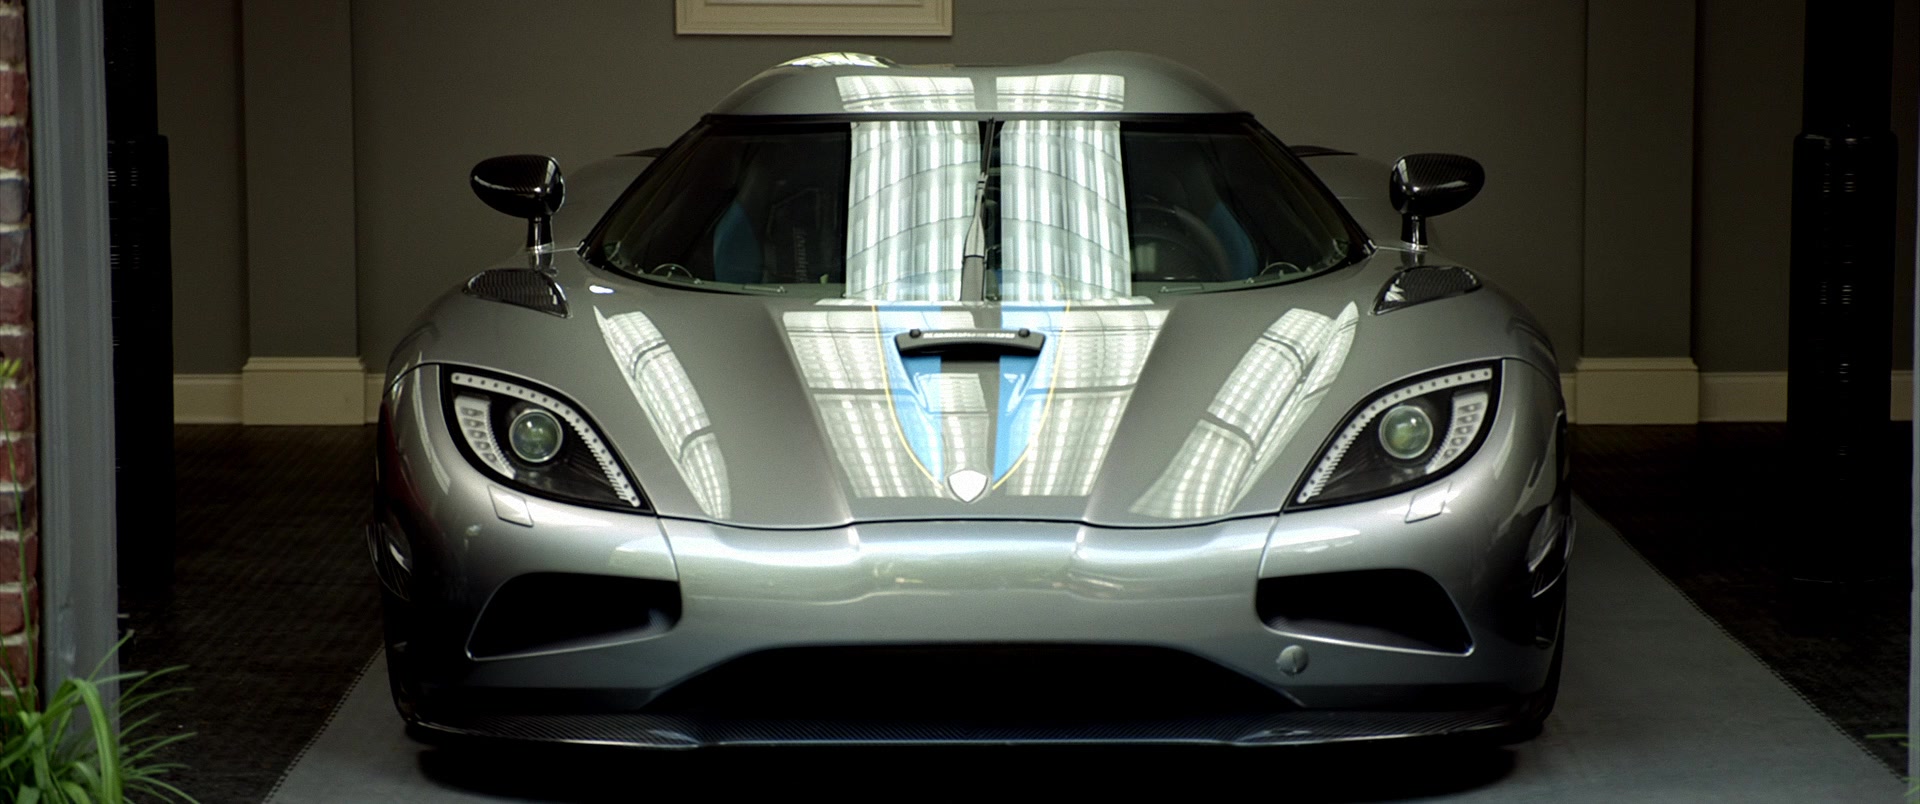 Koenigsegg Agera Grey Sports Car Driven by Aaron Paul in ...